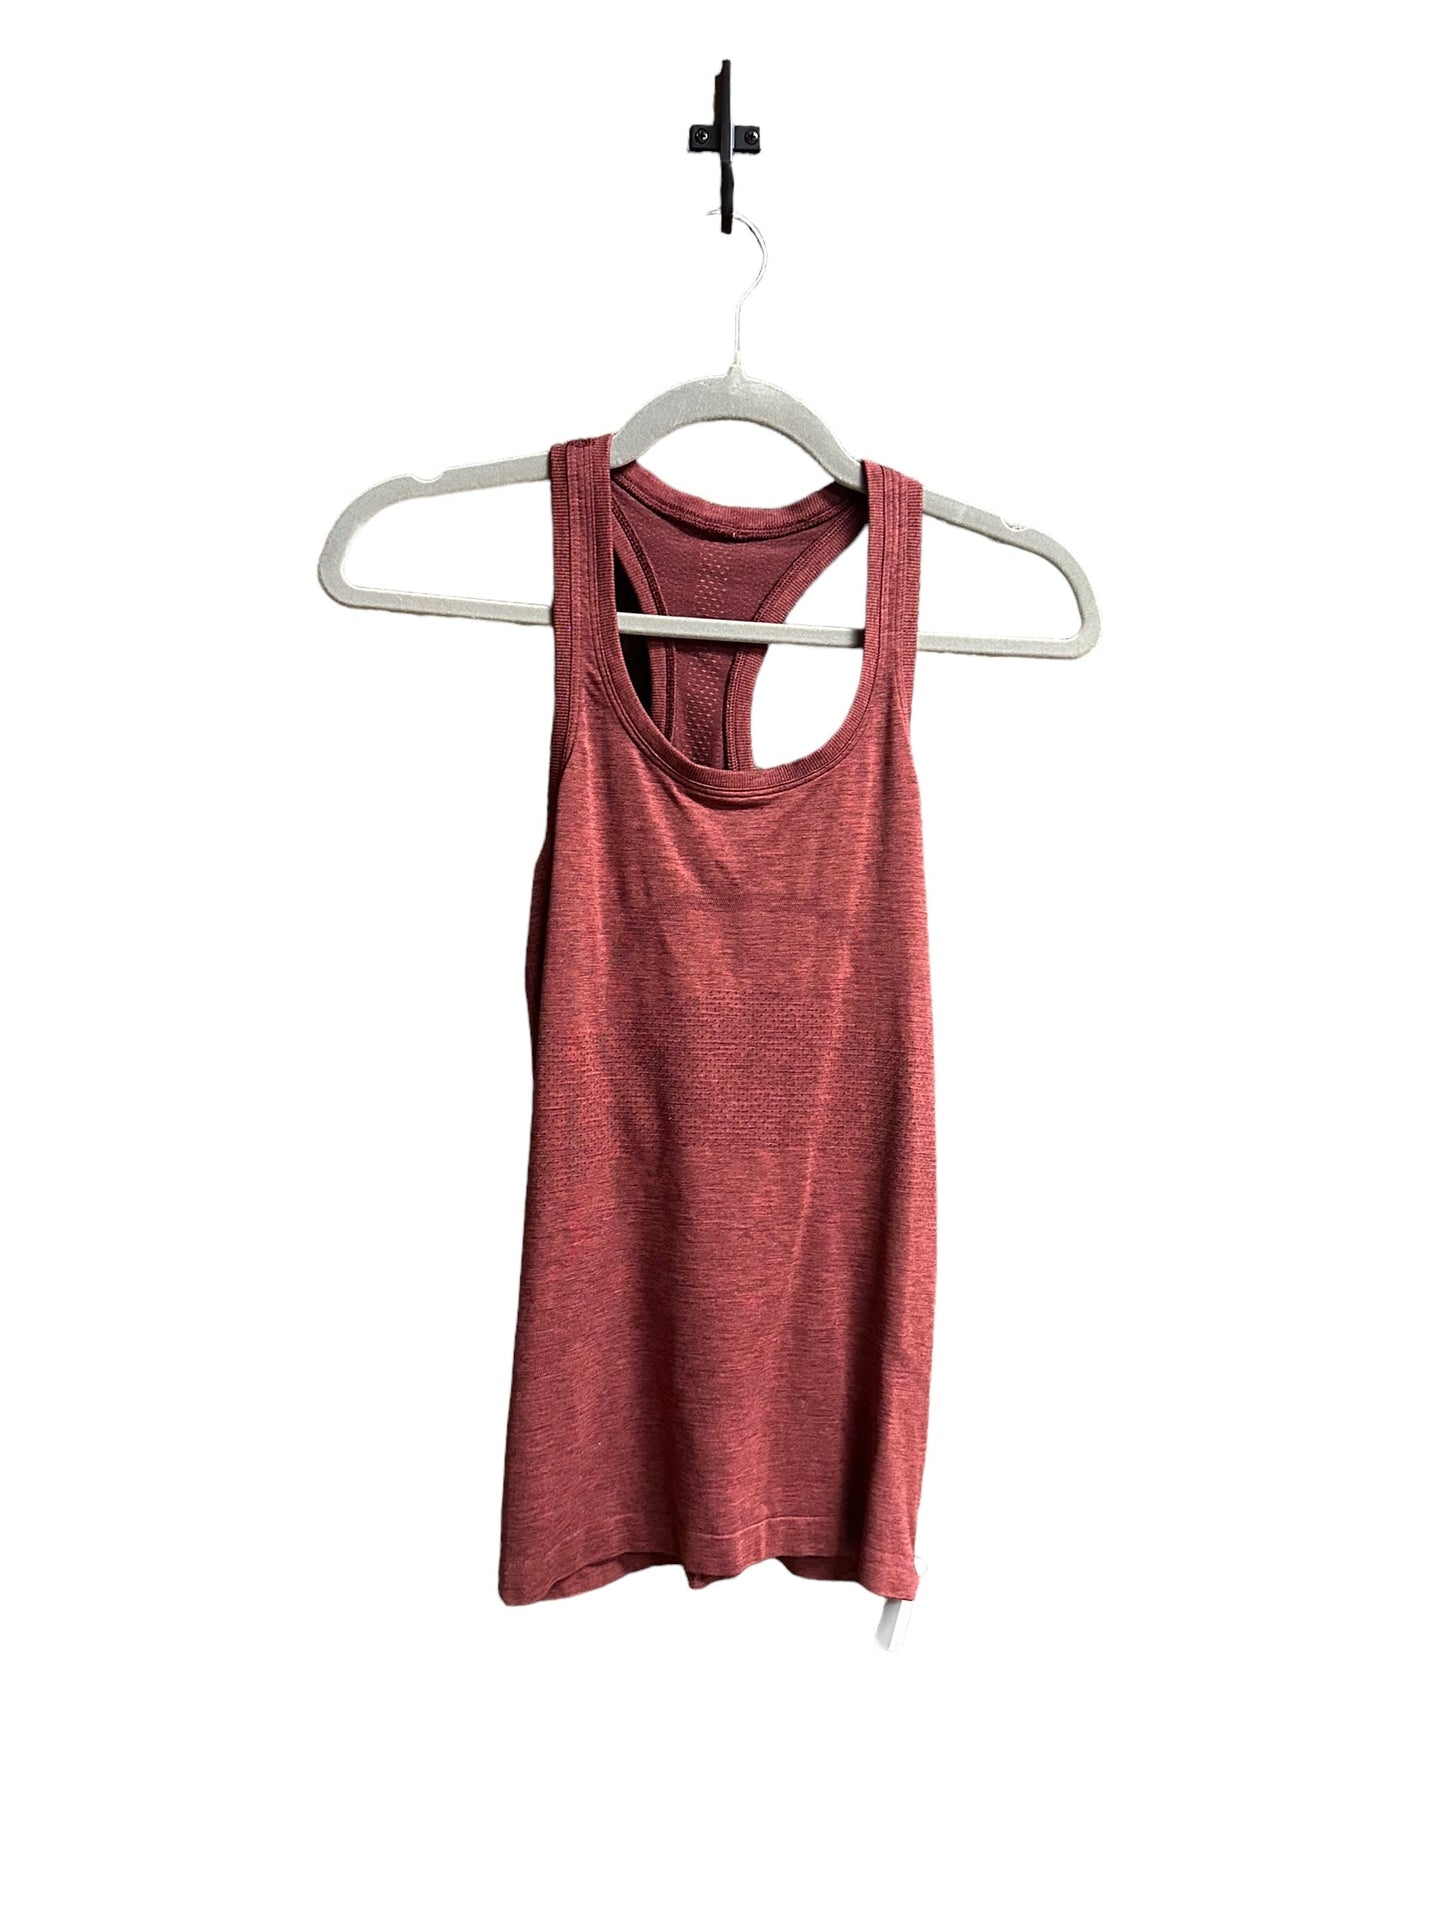 Red Athletic Tank Top Lululemon, Size S